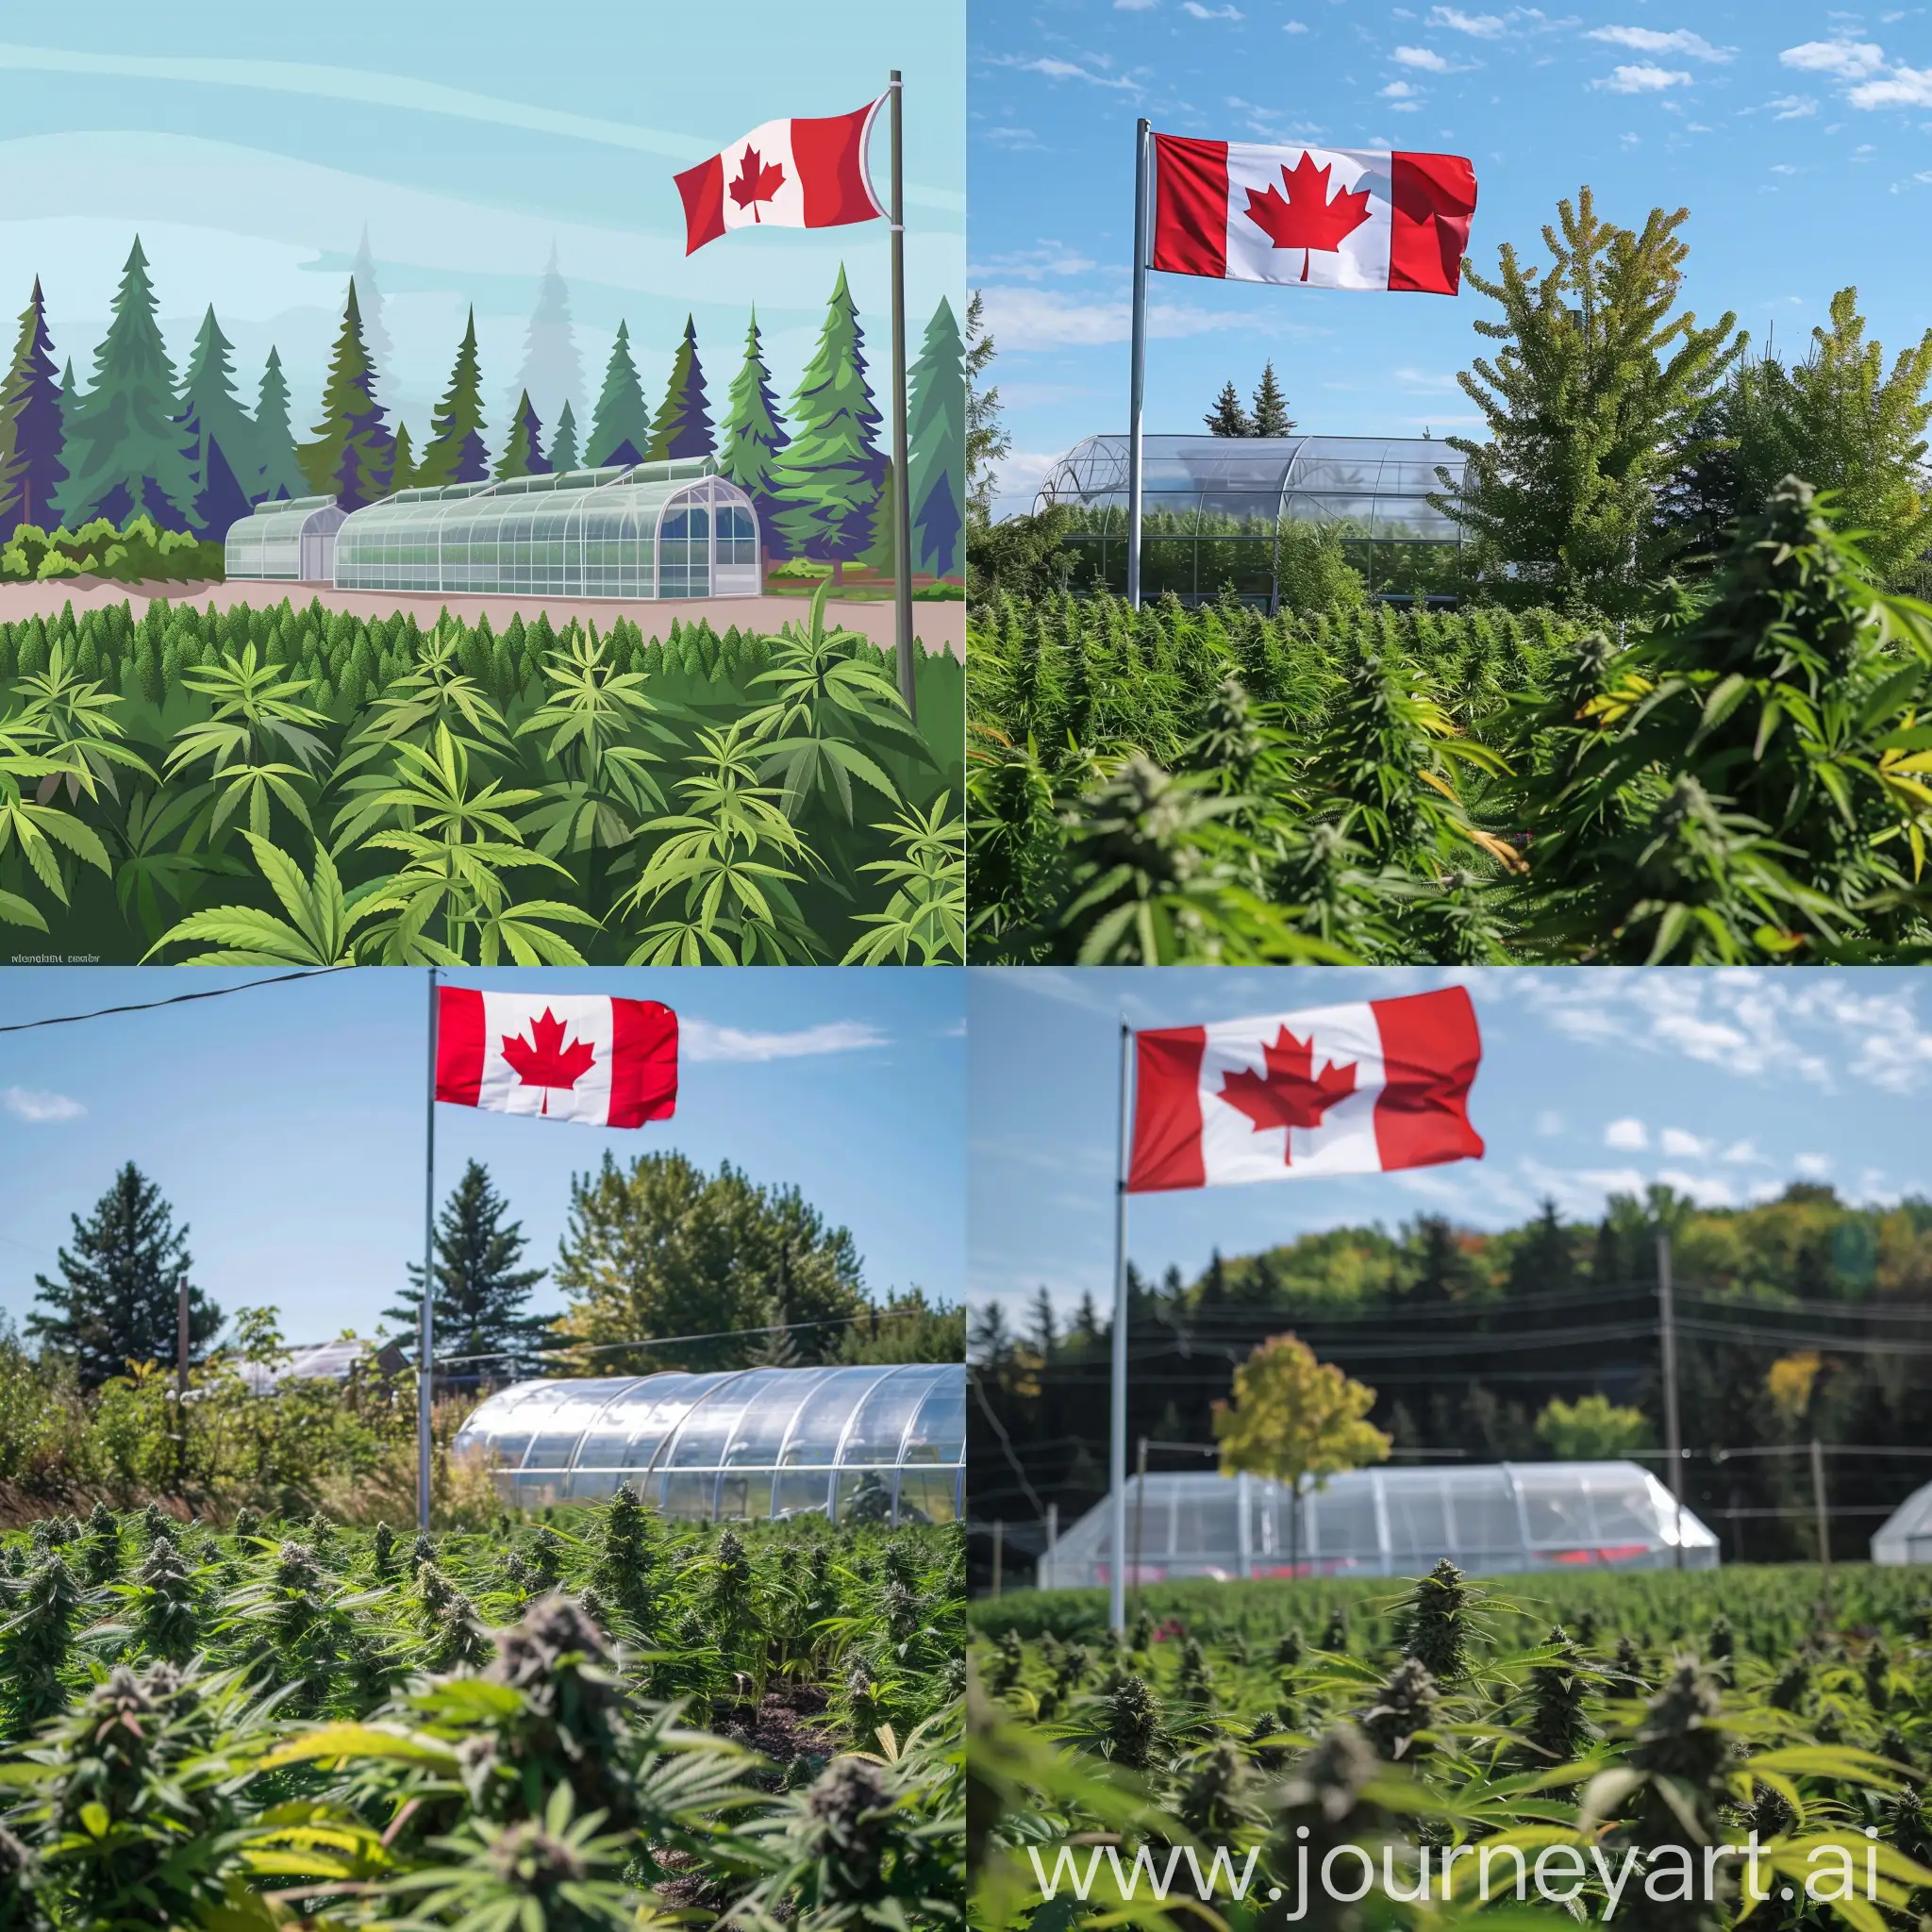 give me a hero image for a website where there is:

- an outdoor cannabis field
- a large Canadian flag on a flag pole in the background
- a high-quality, modern cannabis greenhouse in the background as well

i need you to incorporate my brand colors in to the picture: #0b4a6d ideally in the background, and #39b34a if possible 